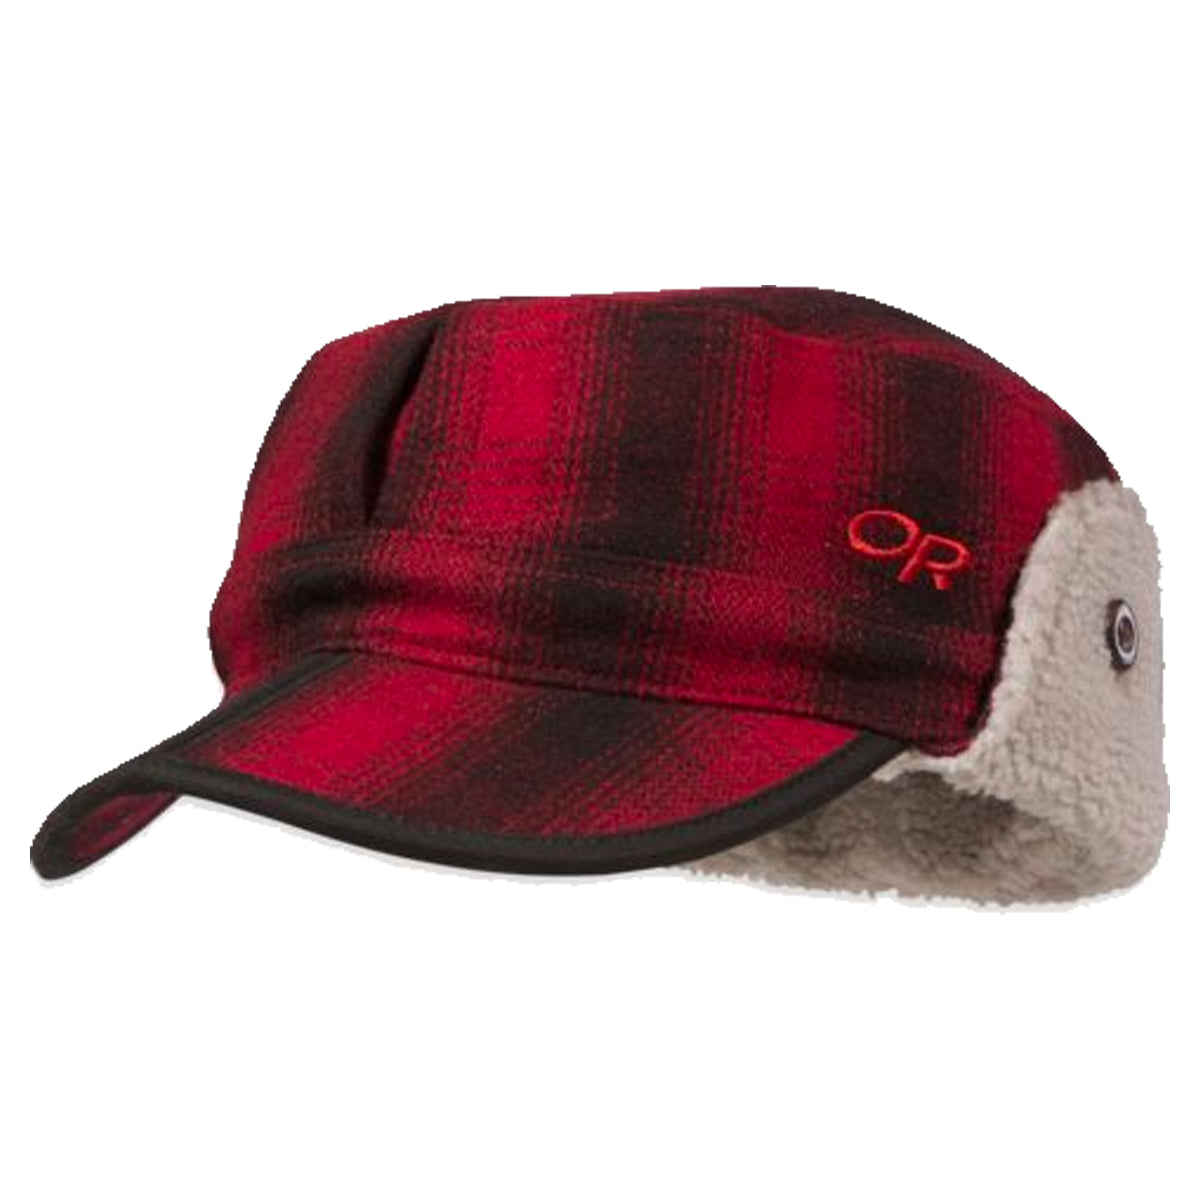 Outdoor Research Yukon Cap in  by GOHUNT | Outdoor Research - GOHUNT Shop